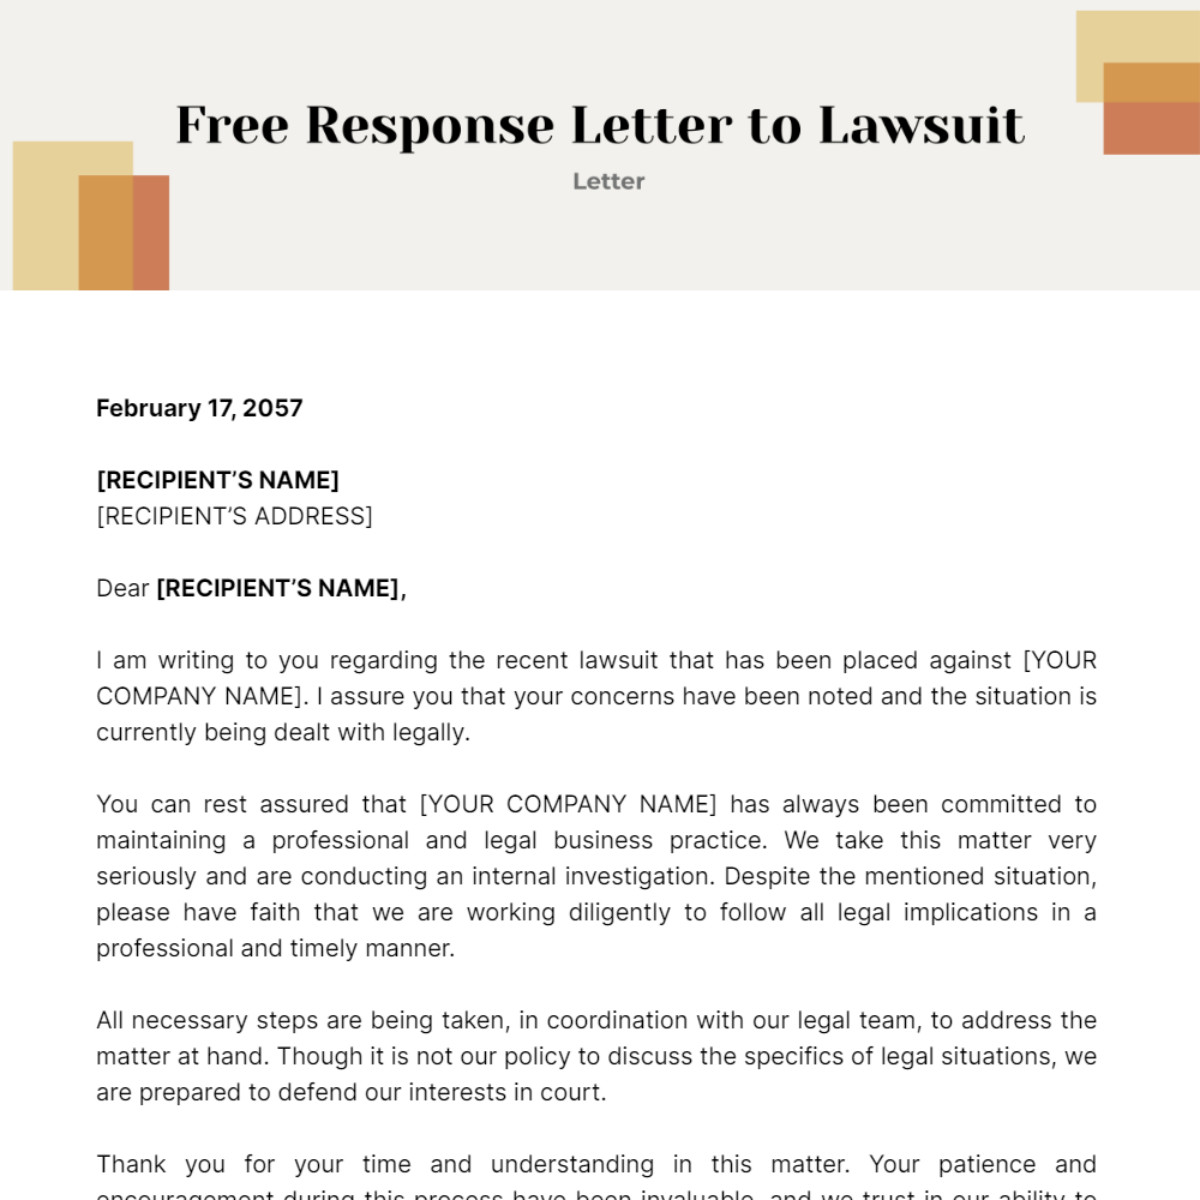 Free Response Letter to Lawsuit